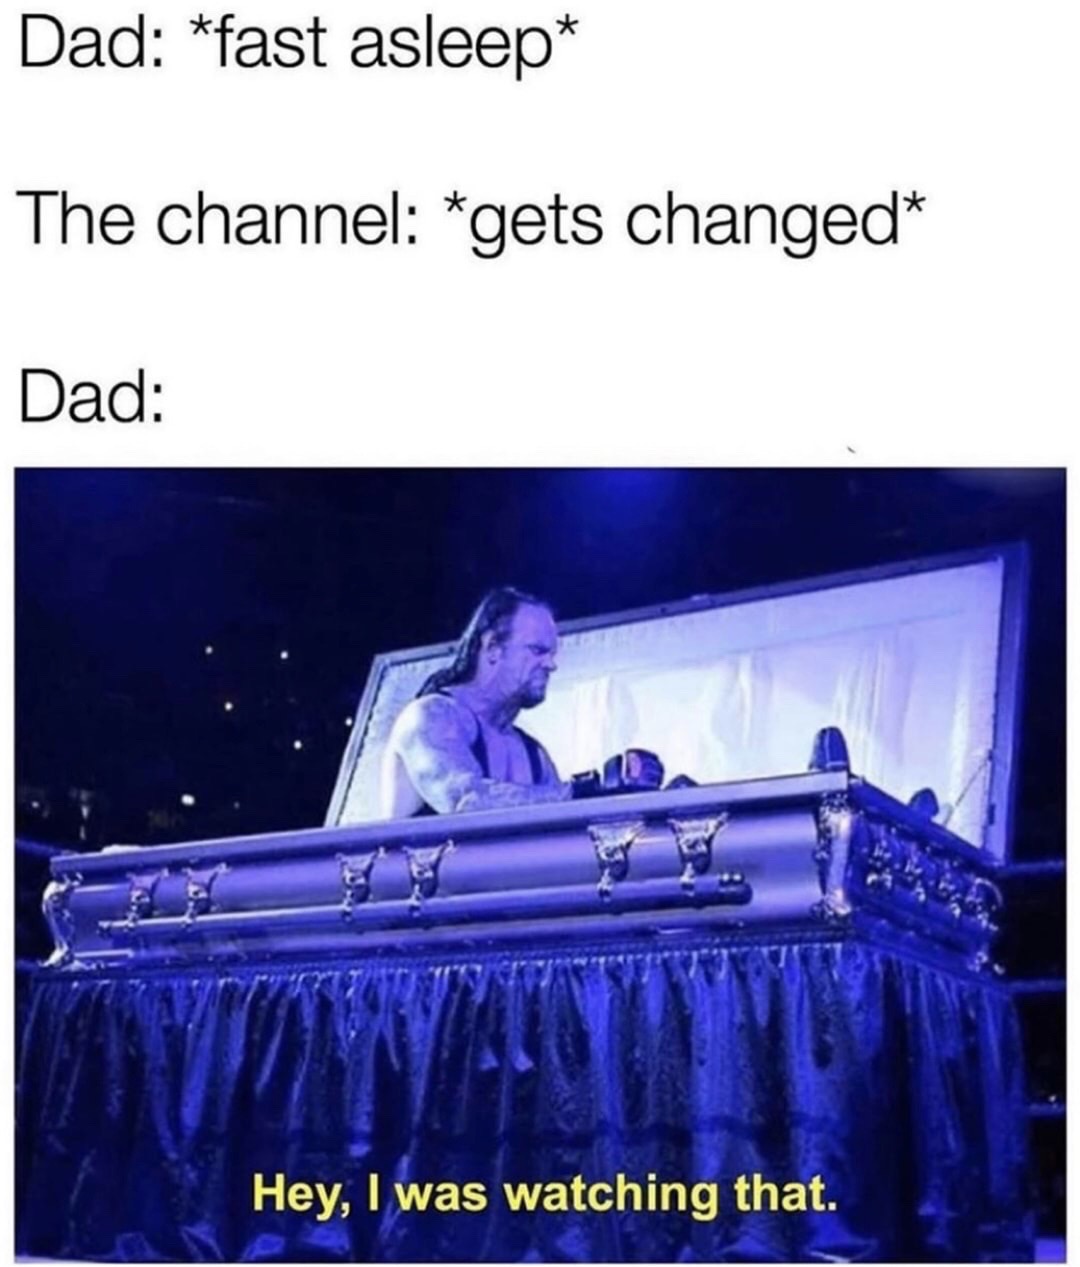 cool pics and memes - dad fast asleep channel gets changed - Dad fast asleep The channel gets changed Dad Hey, I was watching that.